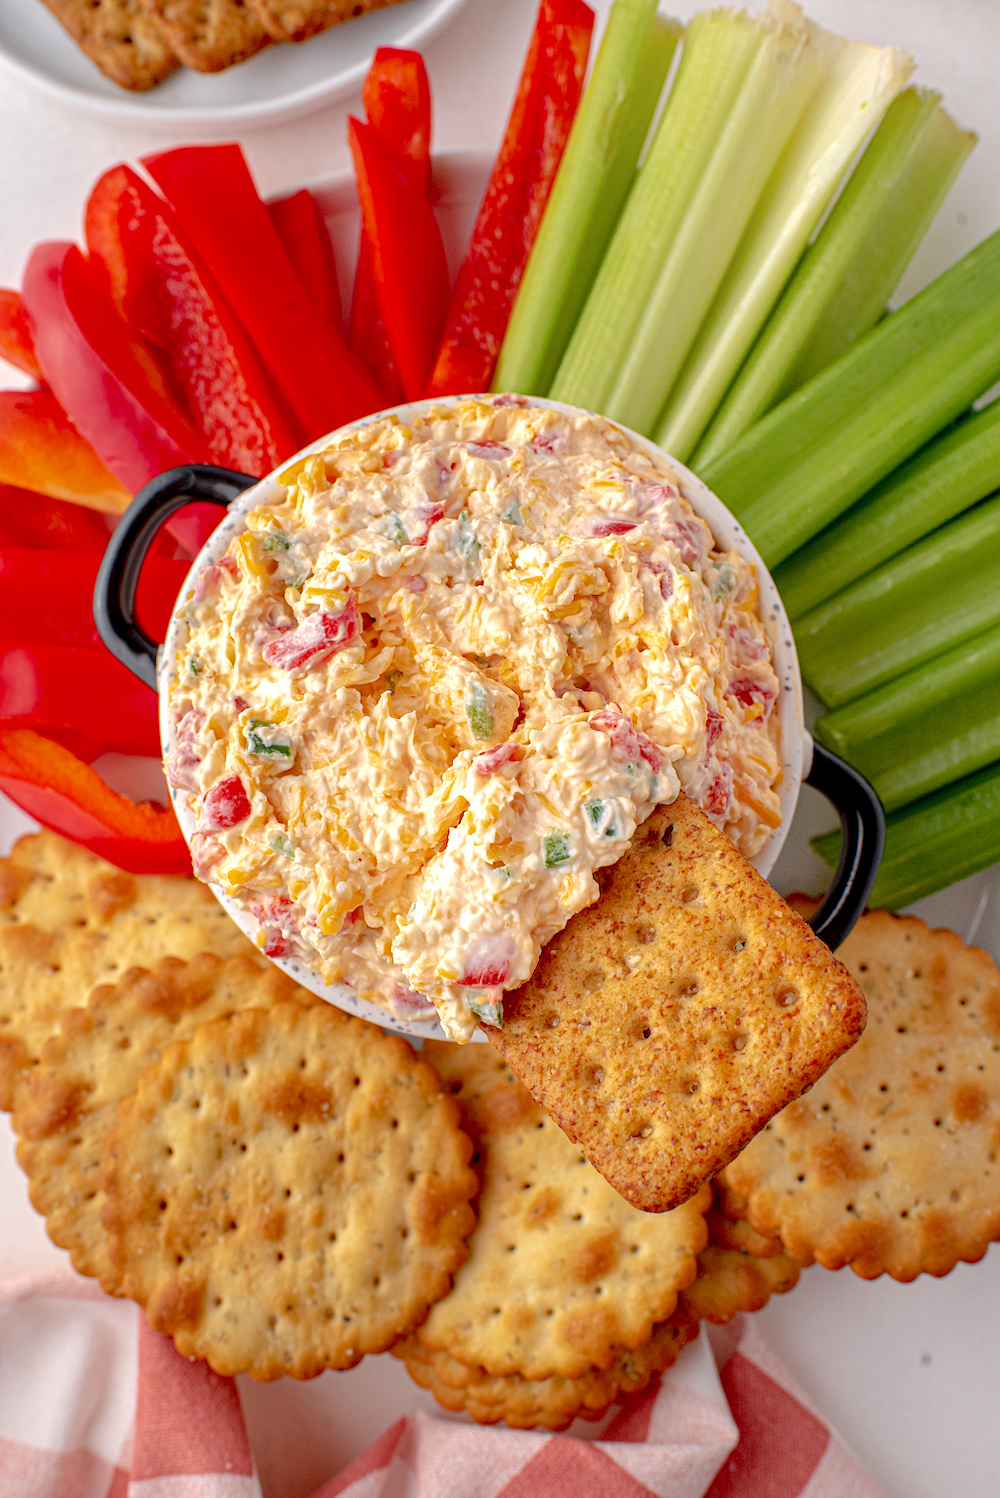 Jalapeno Pimento Cheese Dip with crackers and vegetables